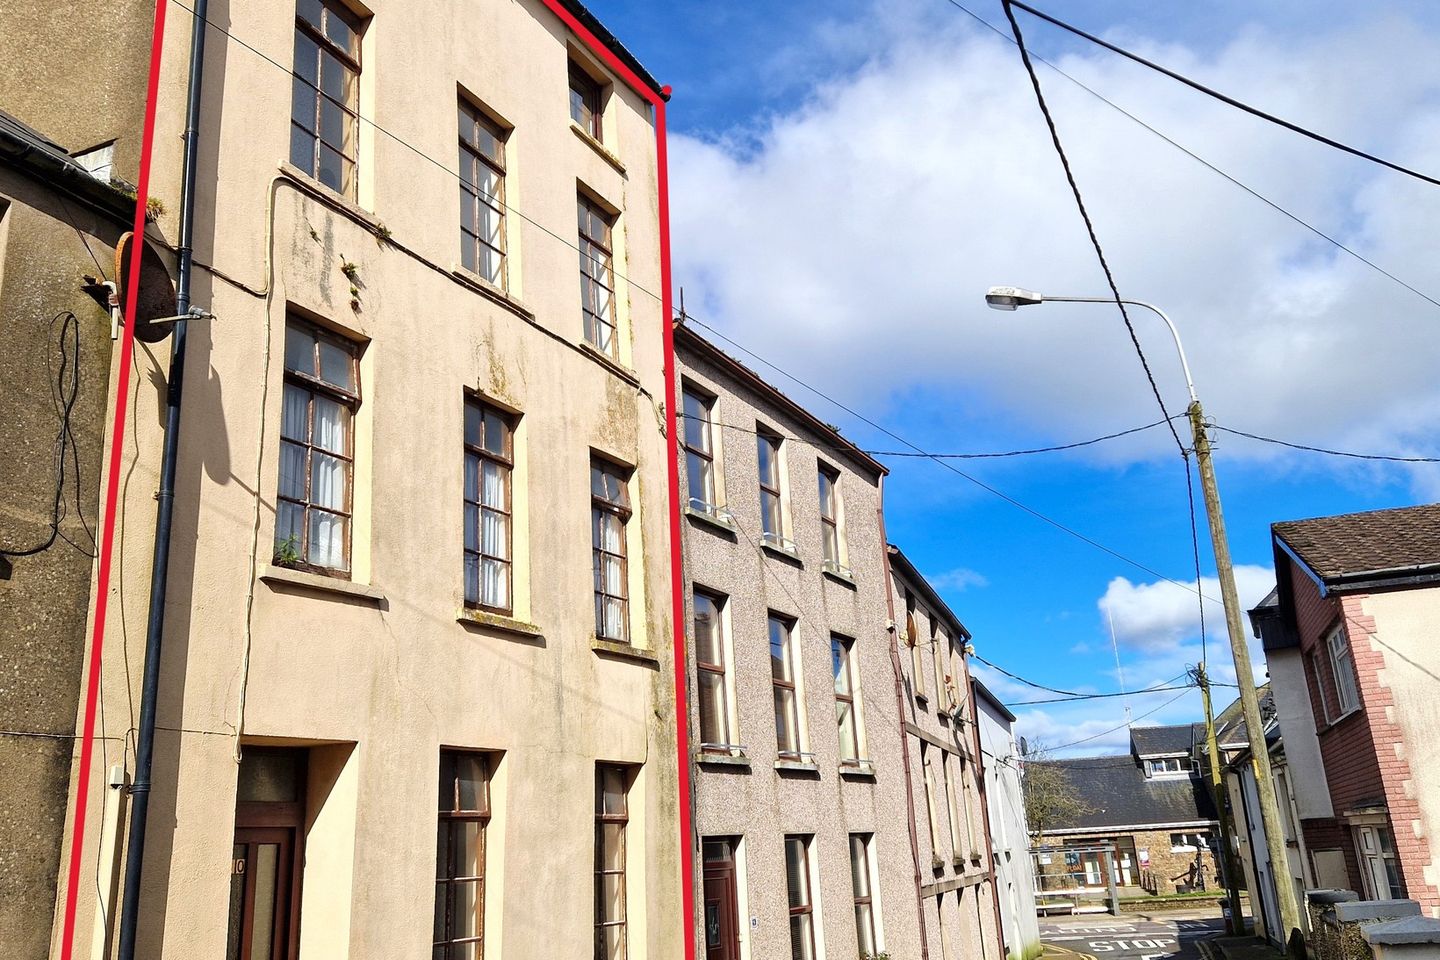 10 Water Street, Youghal, Co. Cork, P36FX50